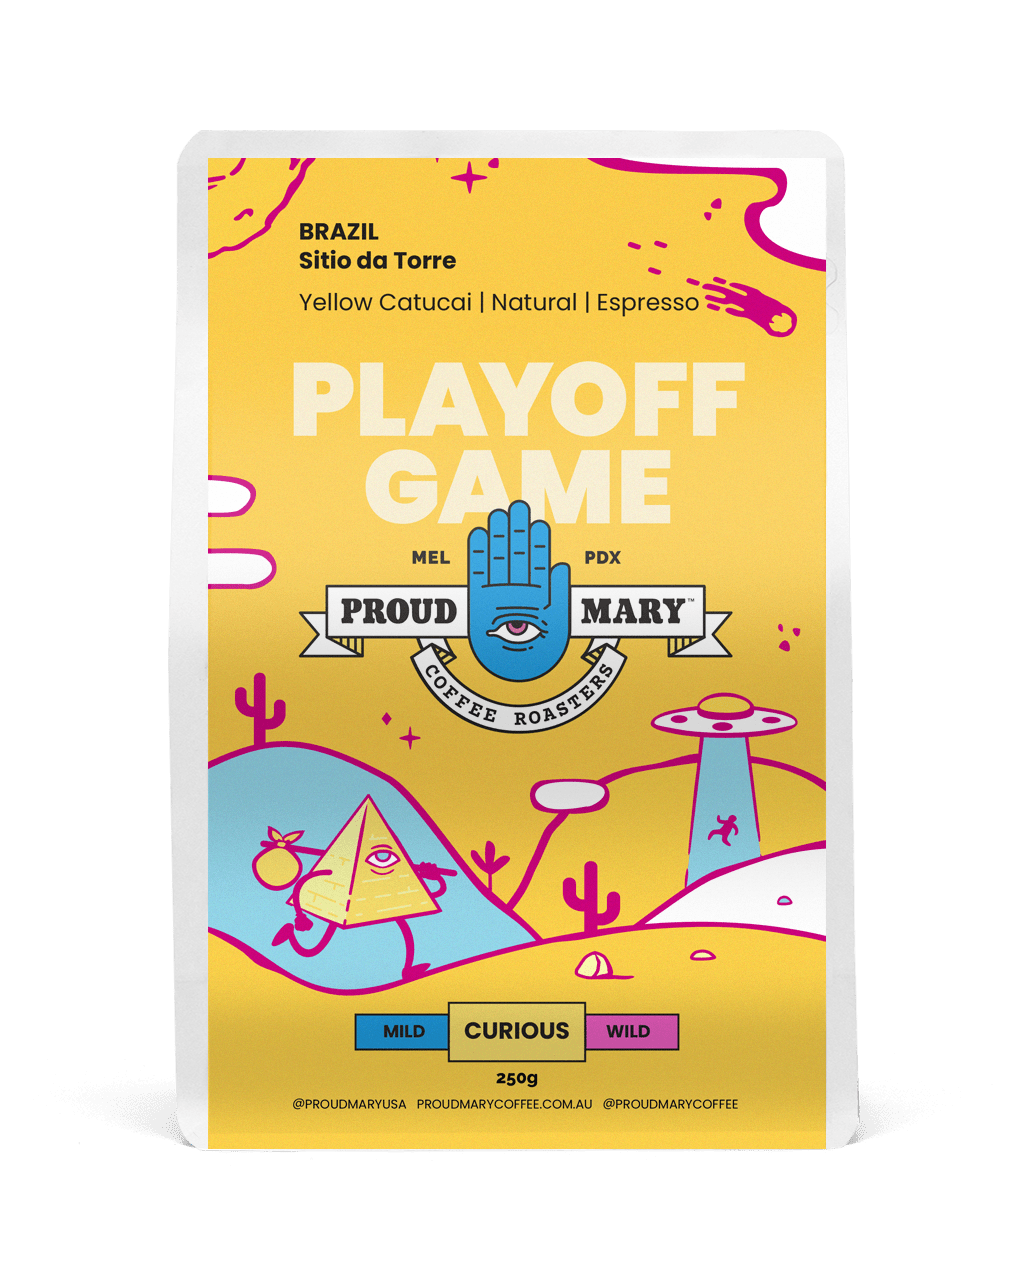 Proud Mary Coffee - Playoff Game, Brazil Sitio da Torre Natural Catucai